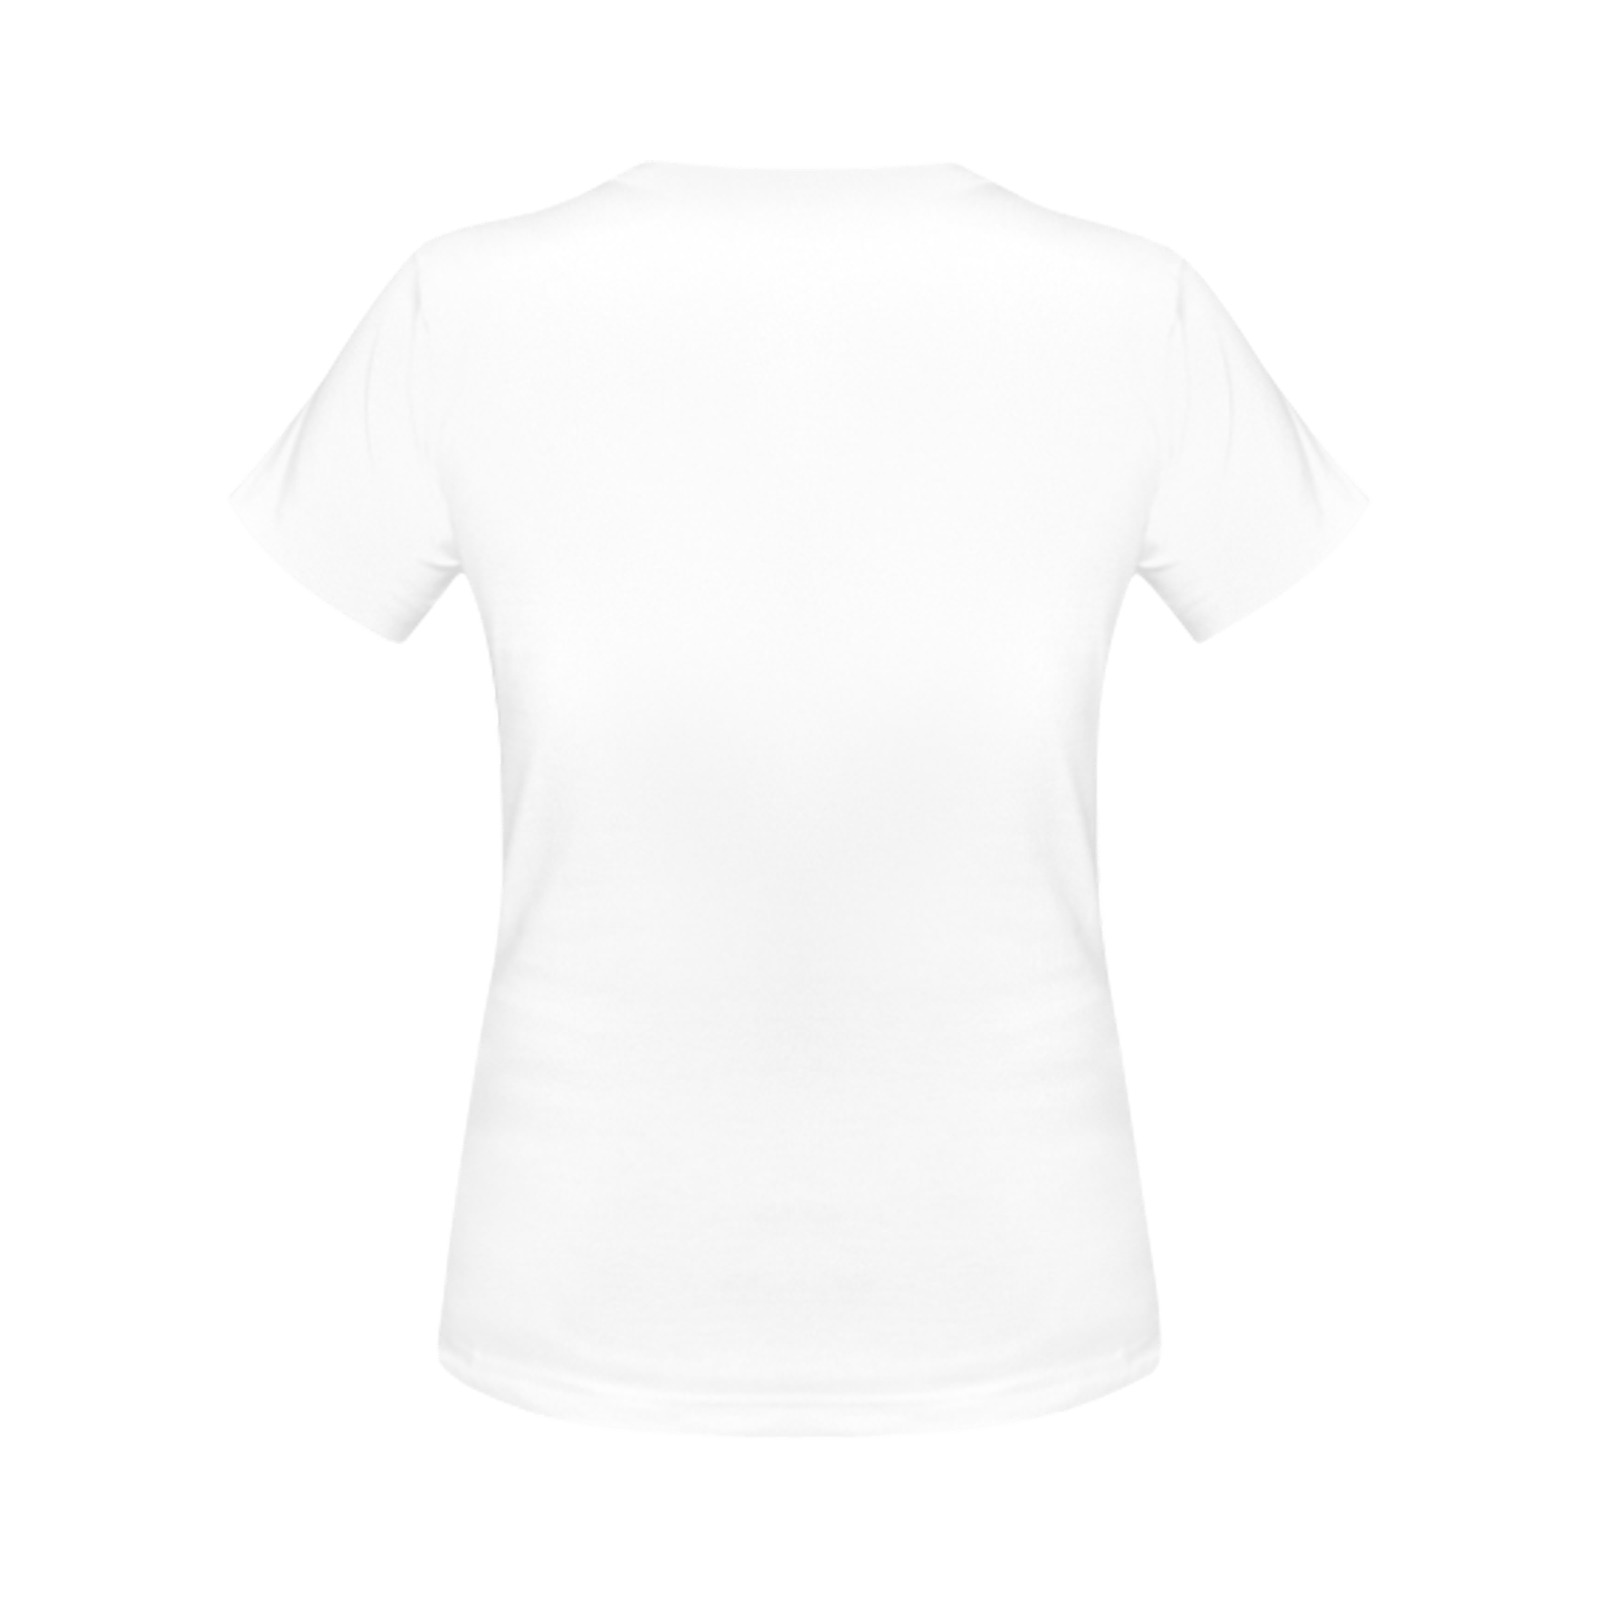 Jalen Grad T-shirt White front print Women Women's T-Shirt in USA Size (Front Printing Only)